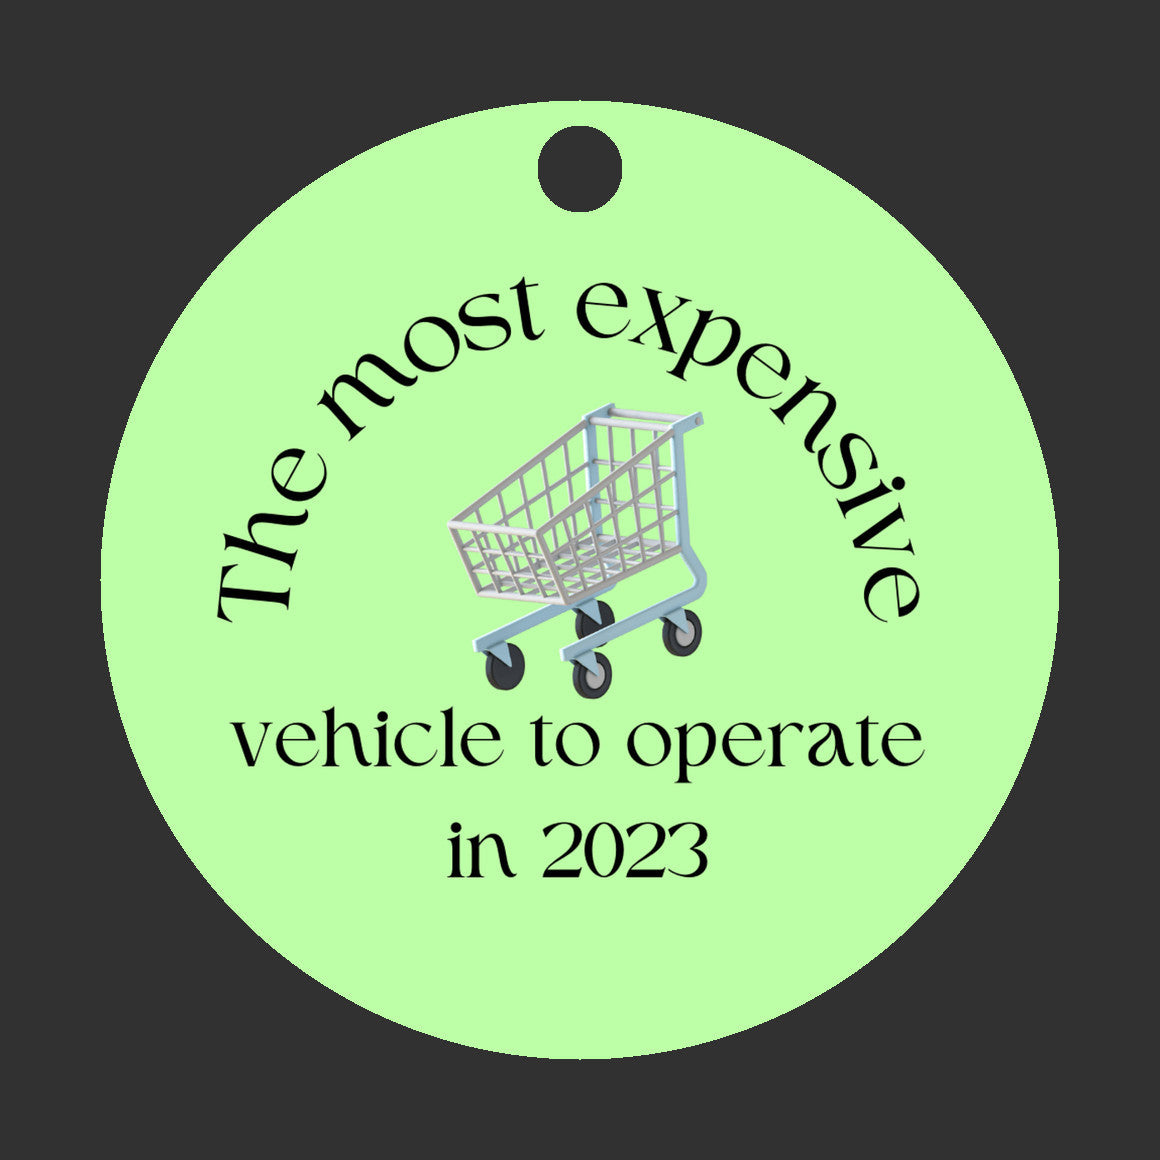 2023 Most expensive vehicle to operate - Christmas Ornament